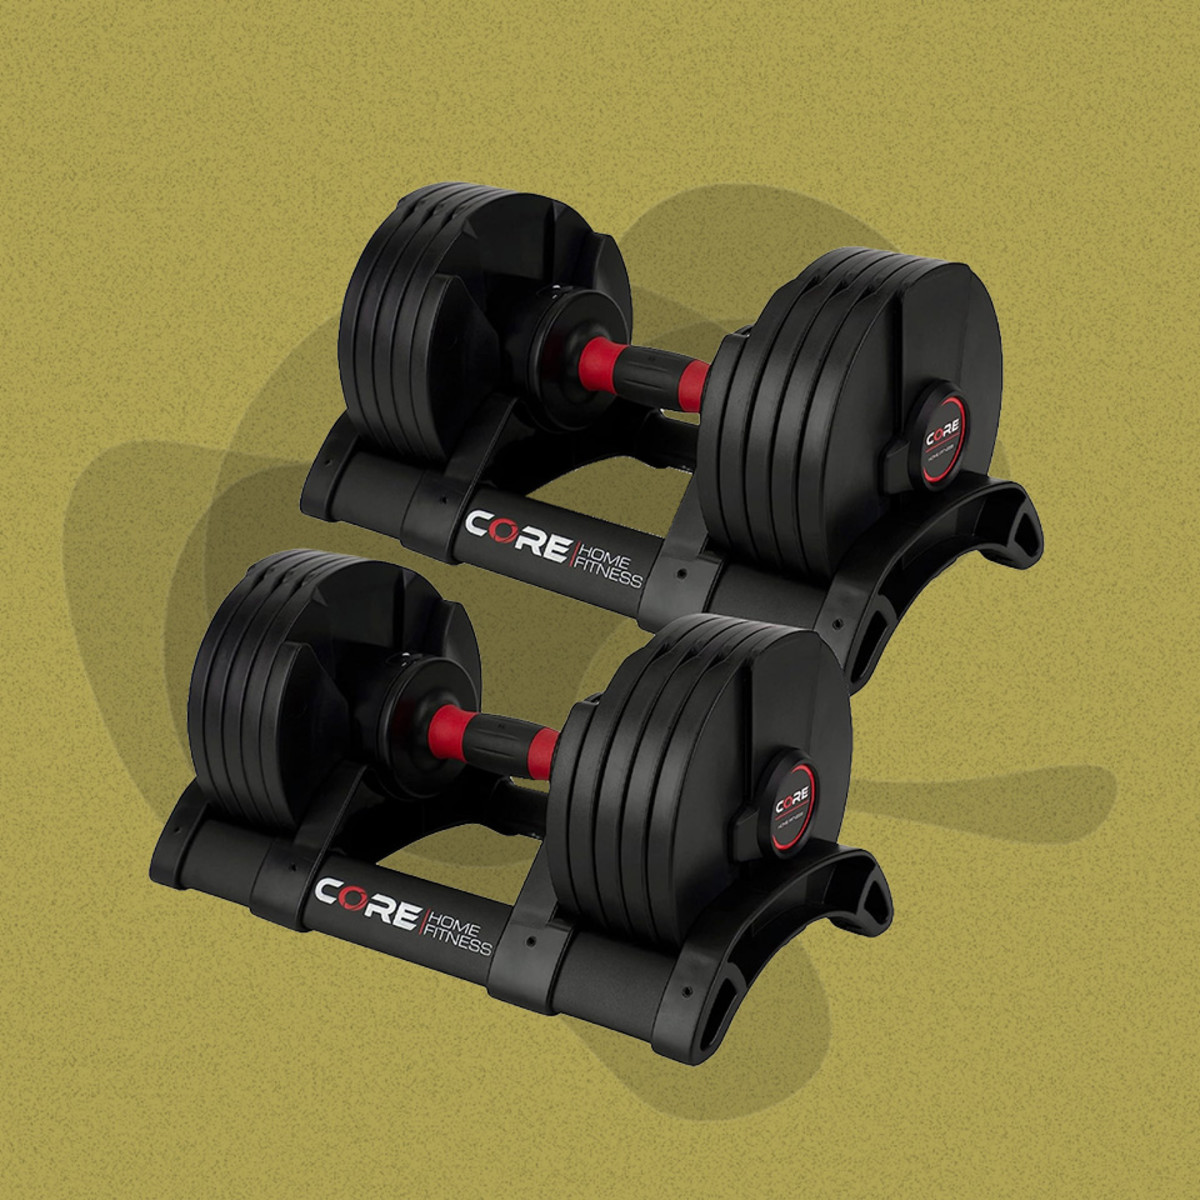  Core Fitness® Adjustable Dumbbell Weight Set by Affordable  Dumbbells - Space Saver - Dumbbells for Your Home : Sports & Outdoors